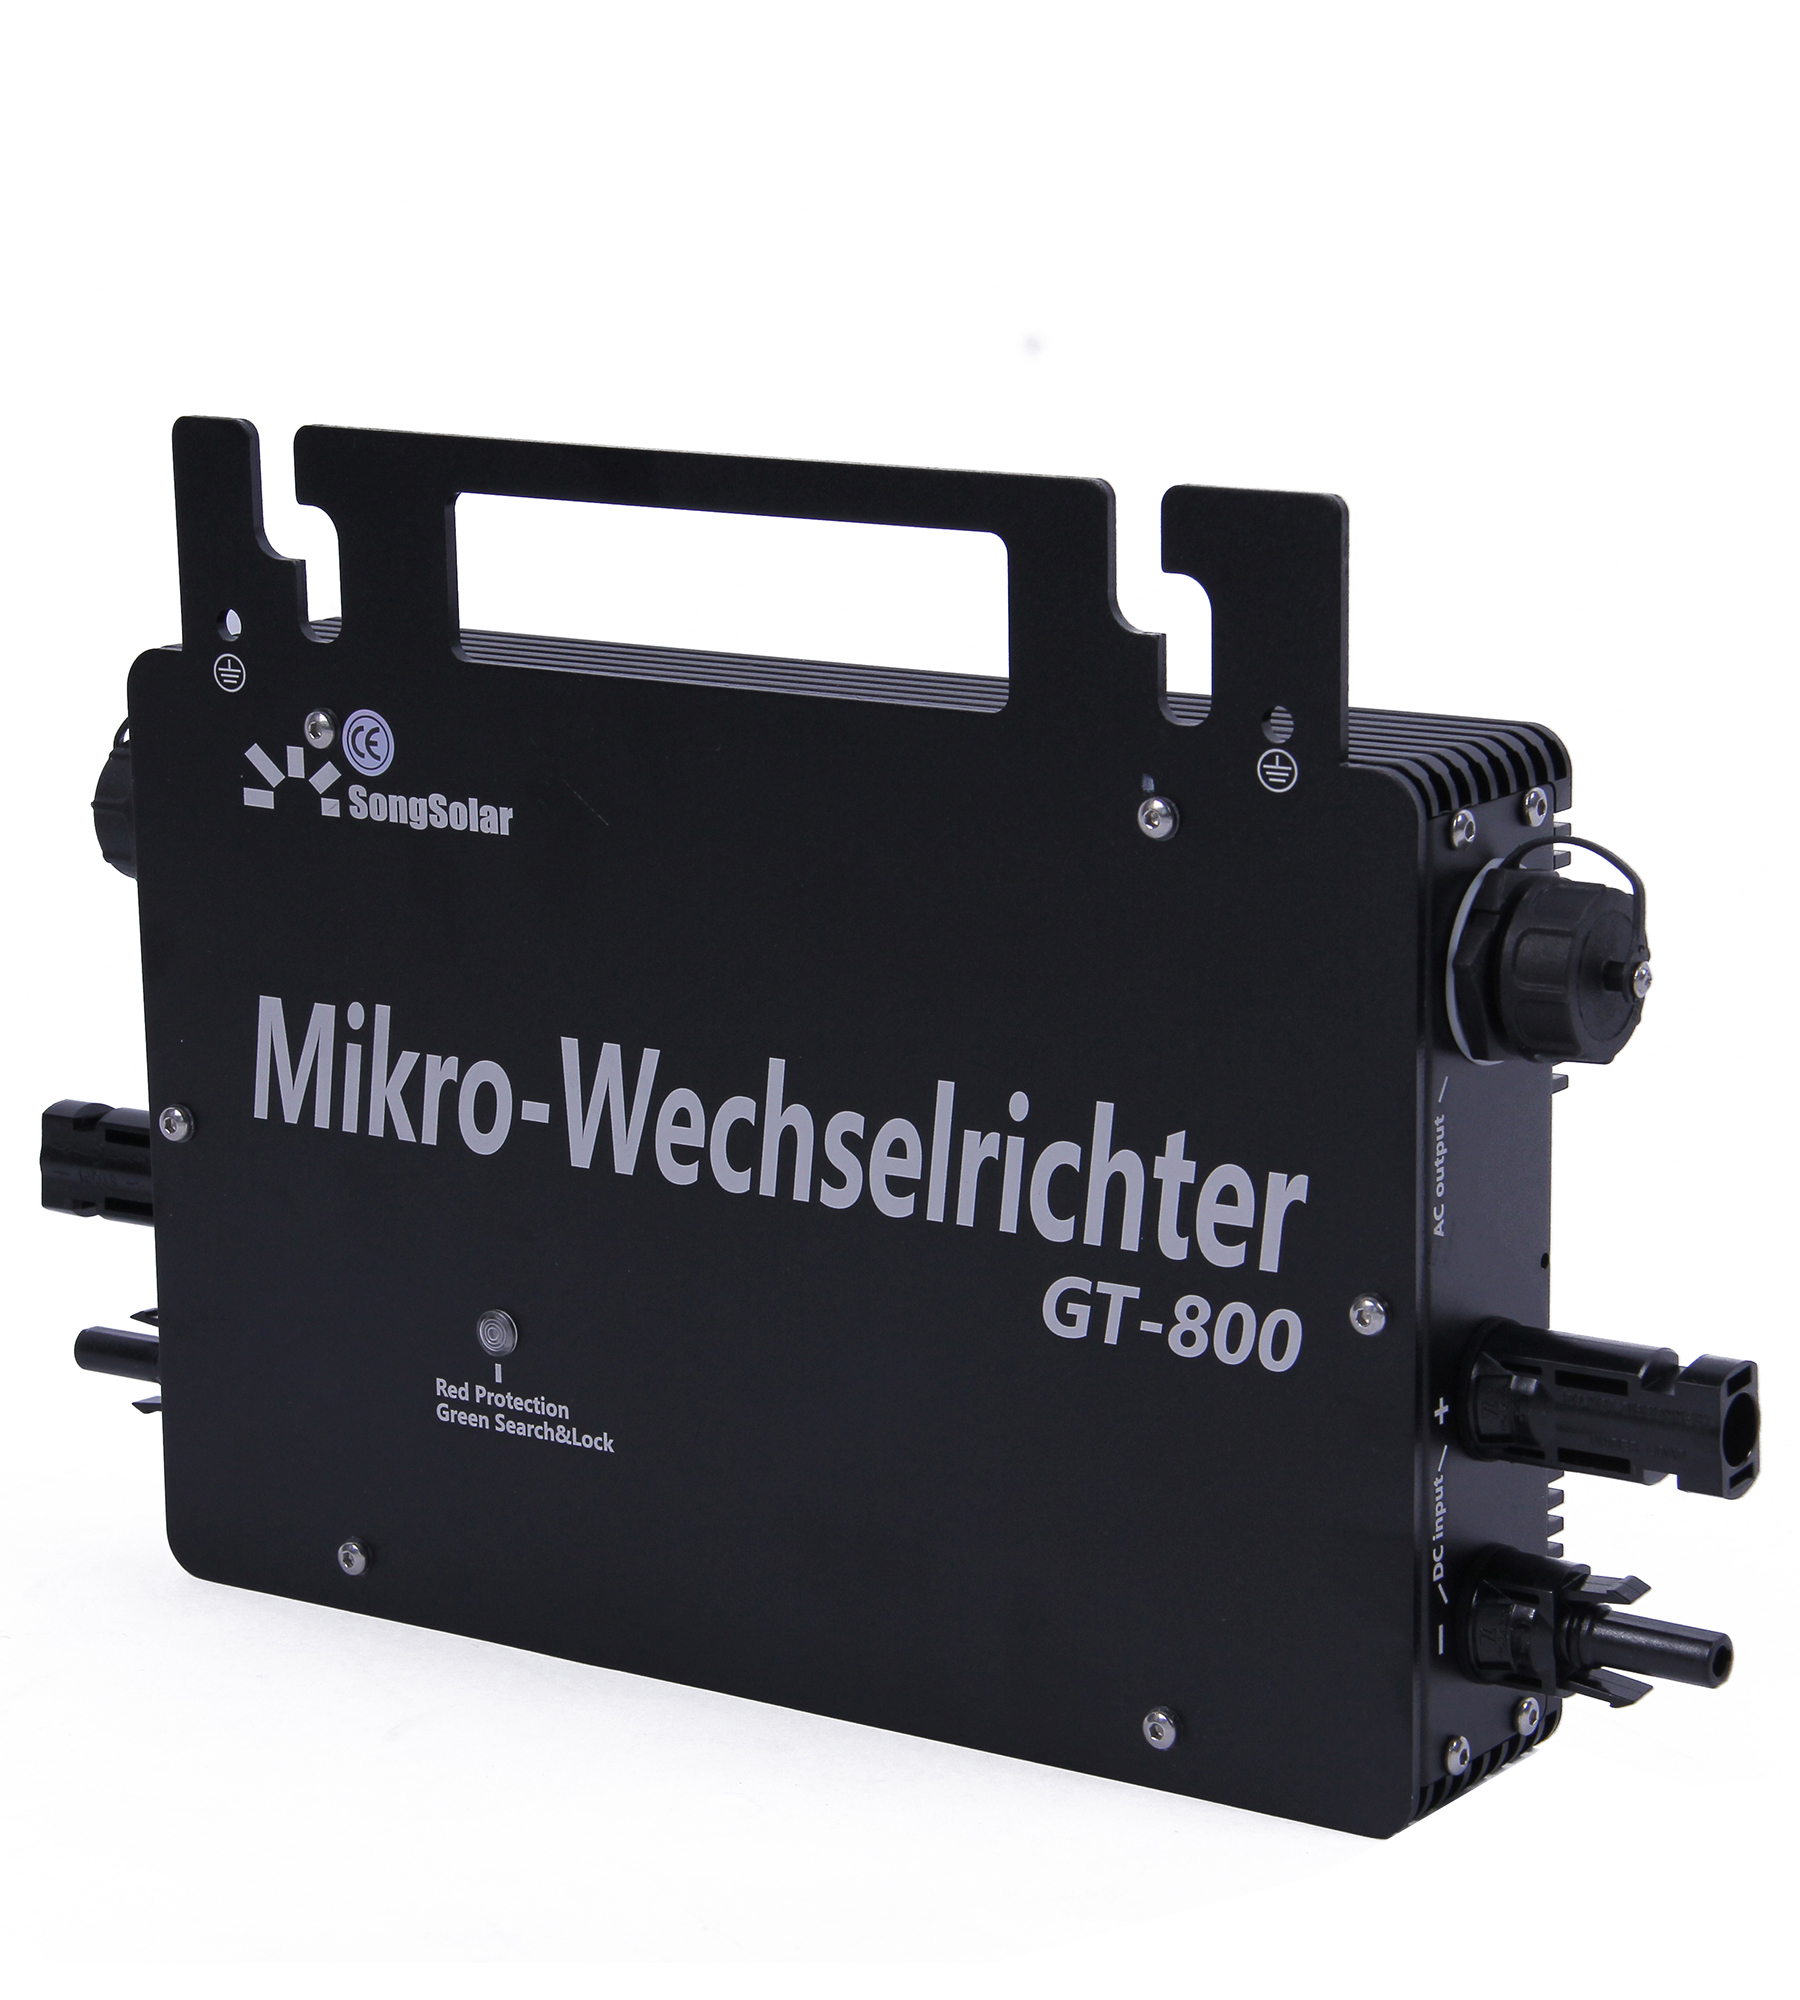 Introducing the Micro Inverter: High Precision, Safe to Use, Maximum Output Power, Wireless Operation.